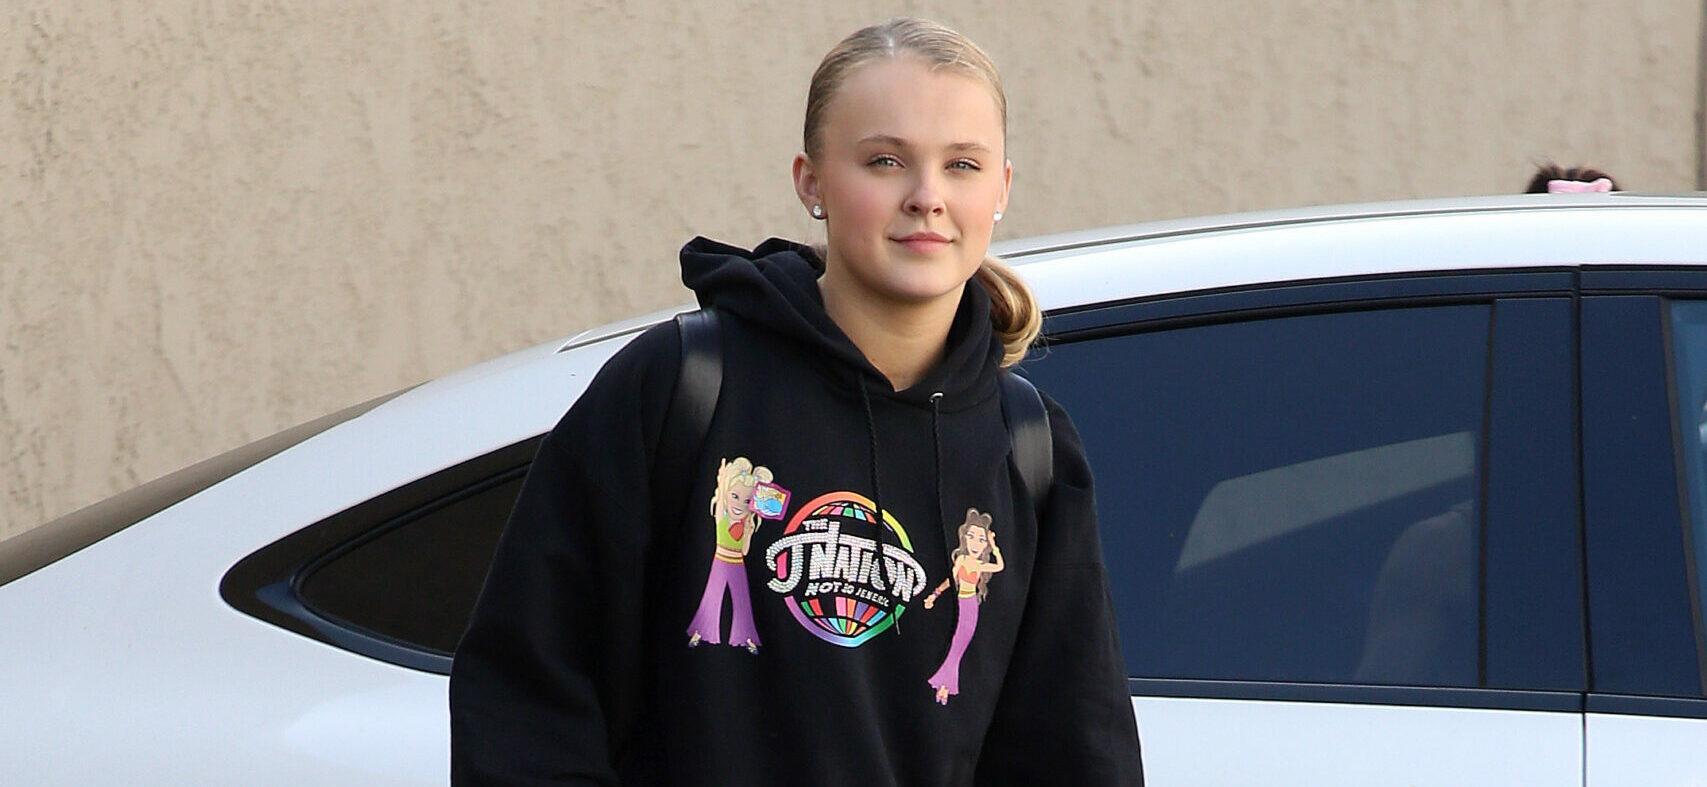 JoJo Siwa shows off her moves at the dance studio